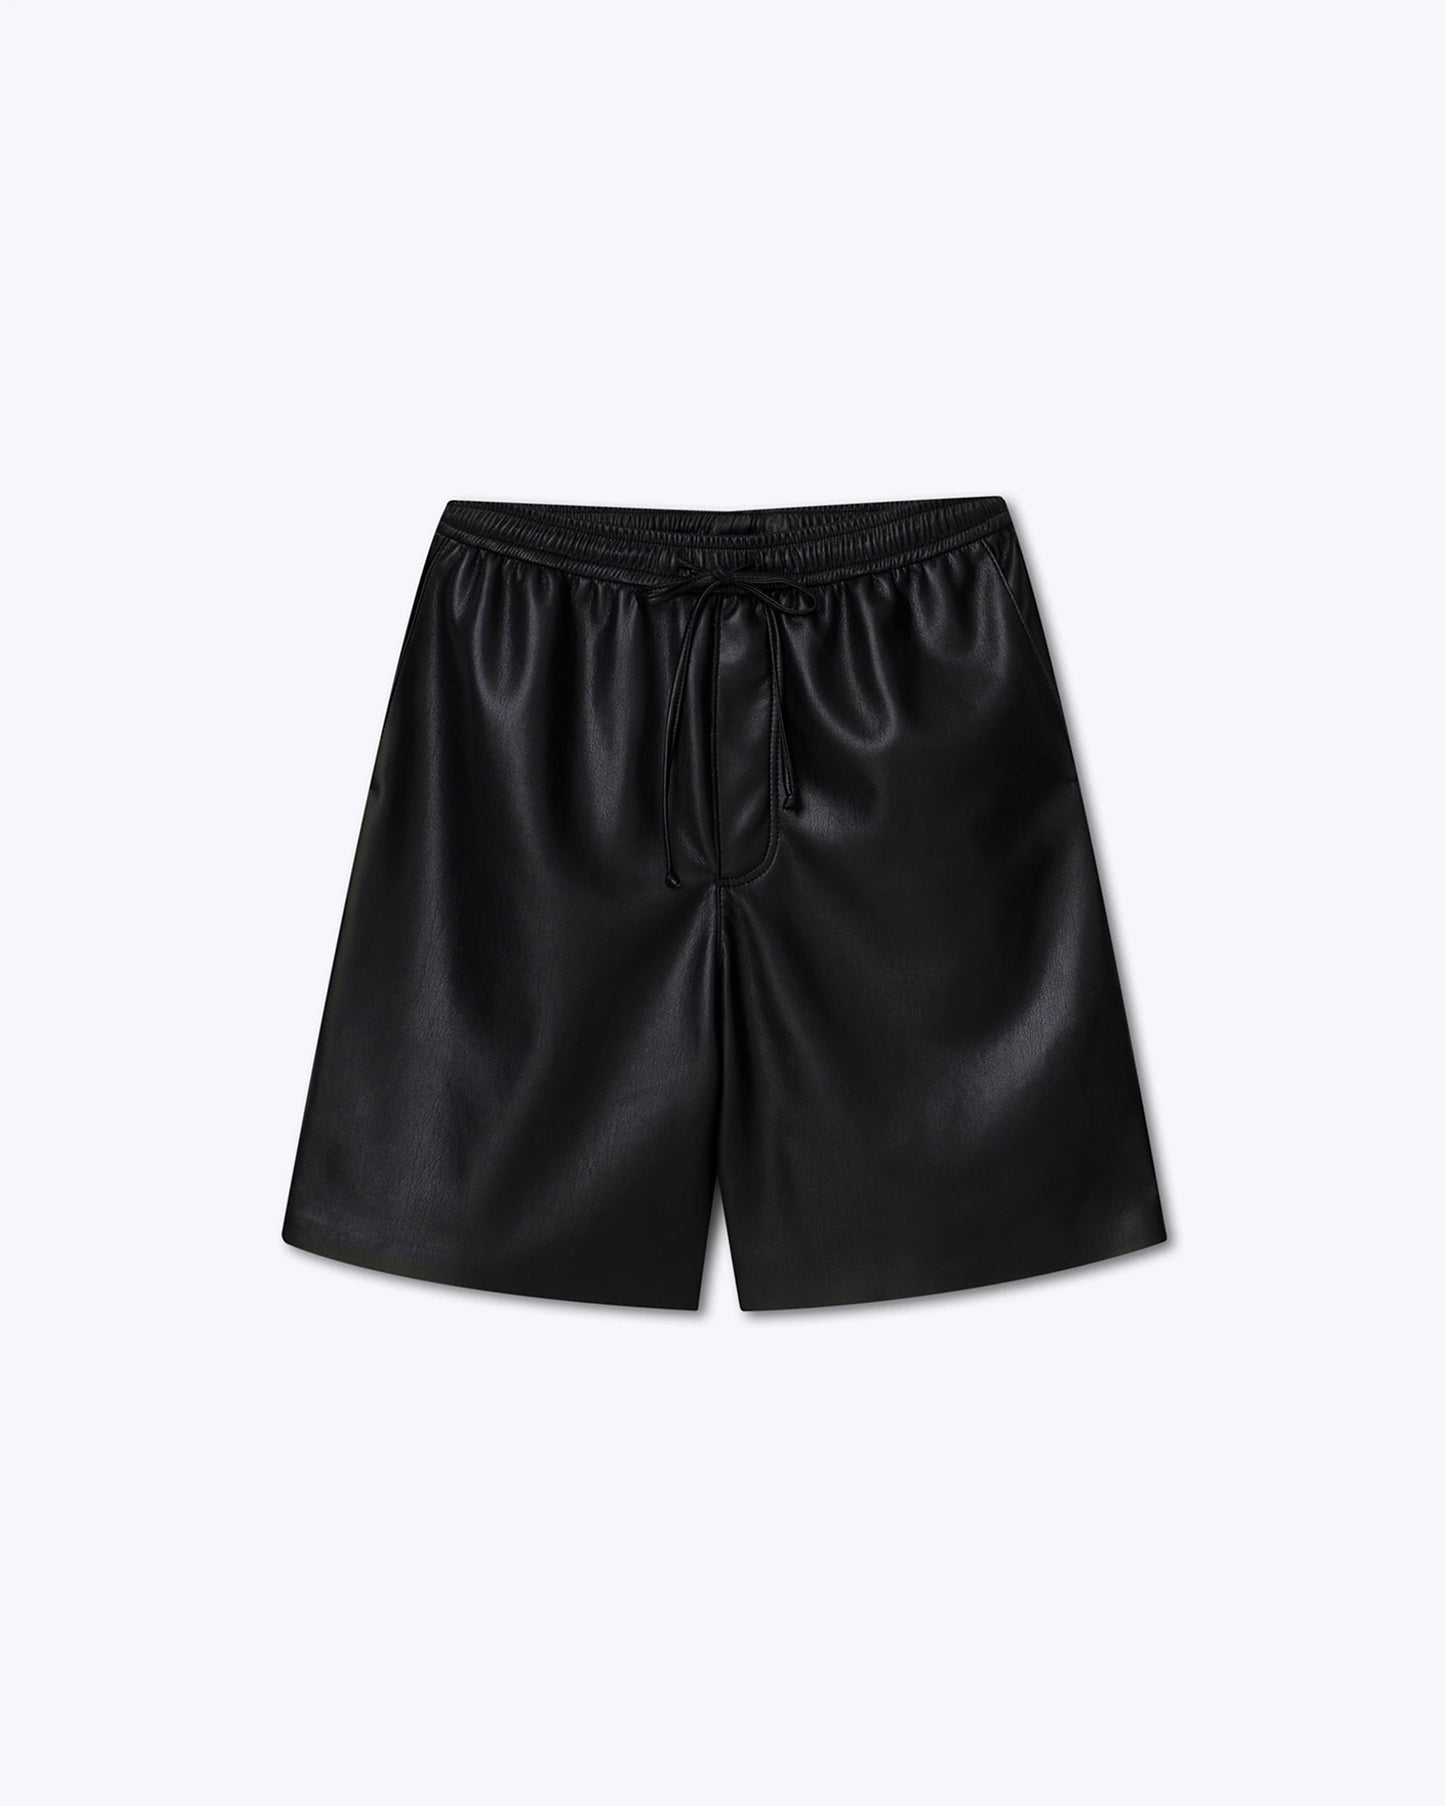 LEATHER DOXXI SHORTS